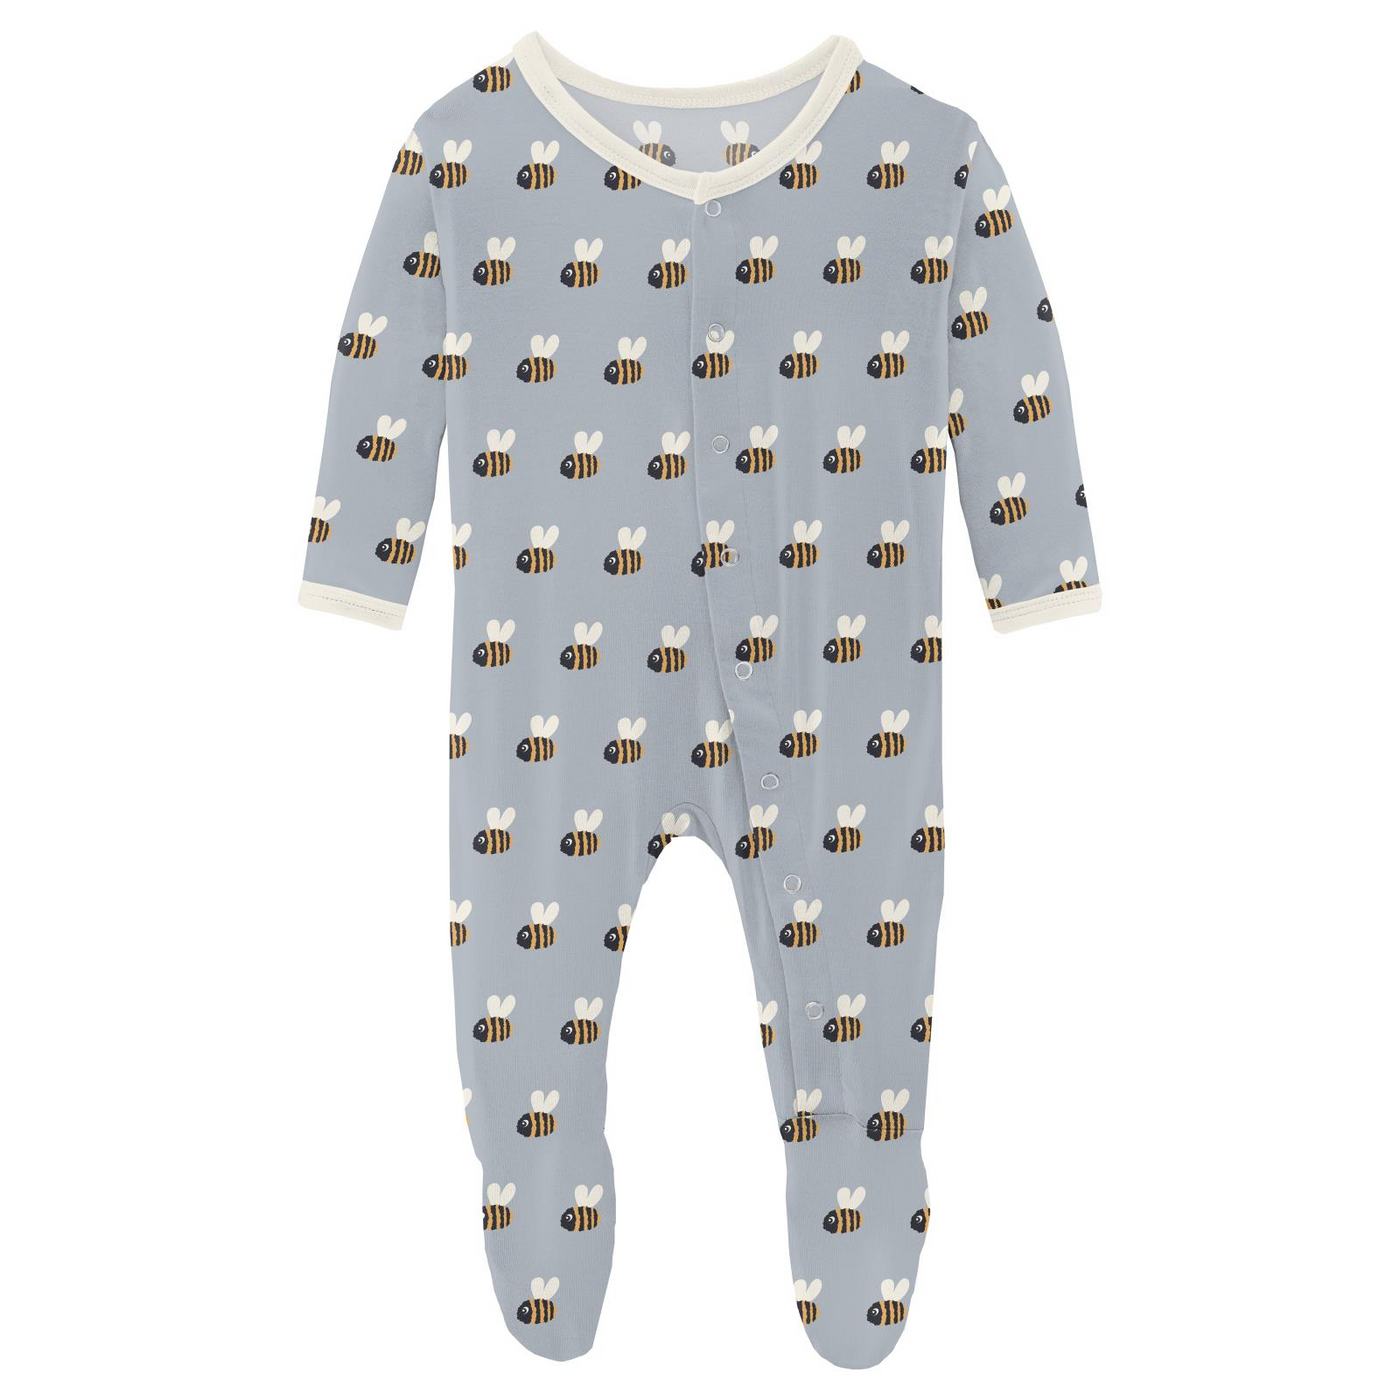 Kickee Pants Footie With Snaps: Pearl Blue Baby Bumblebee  (Ships 5/15-6/15)